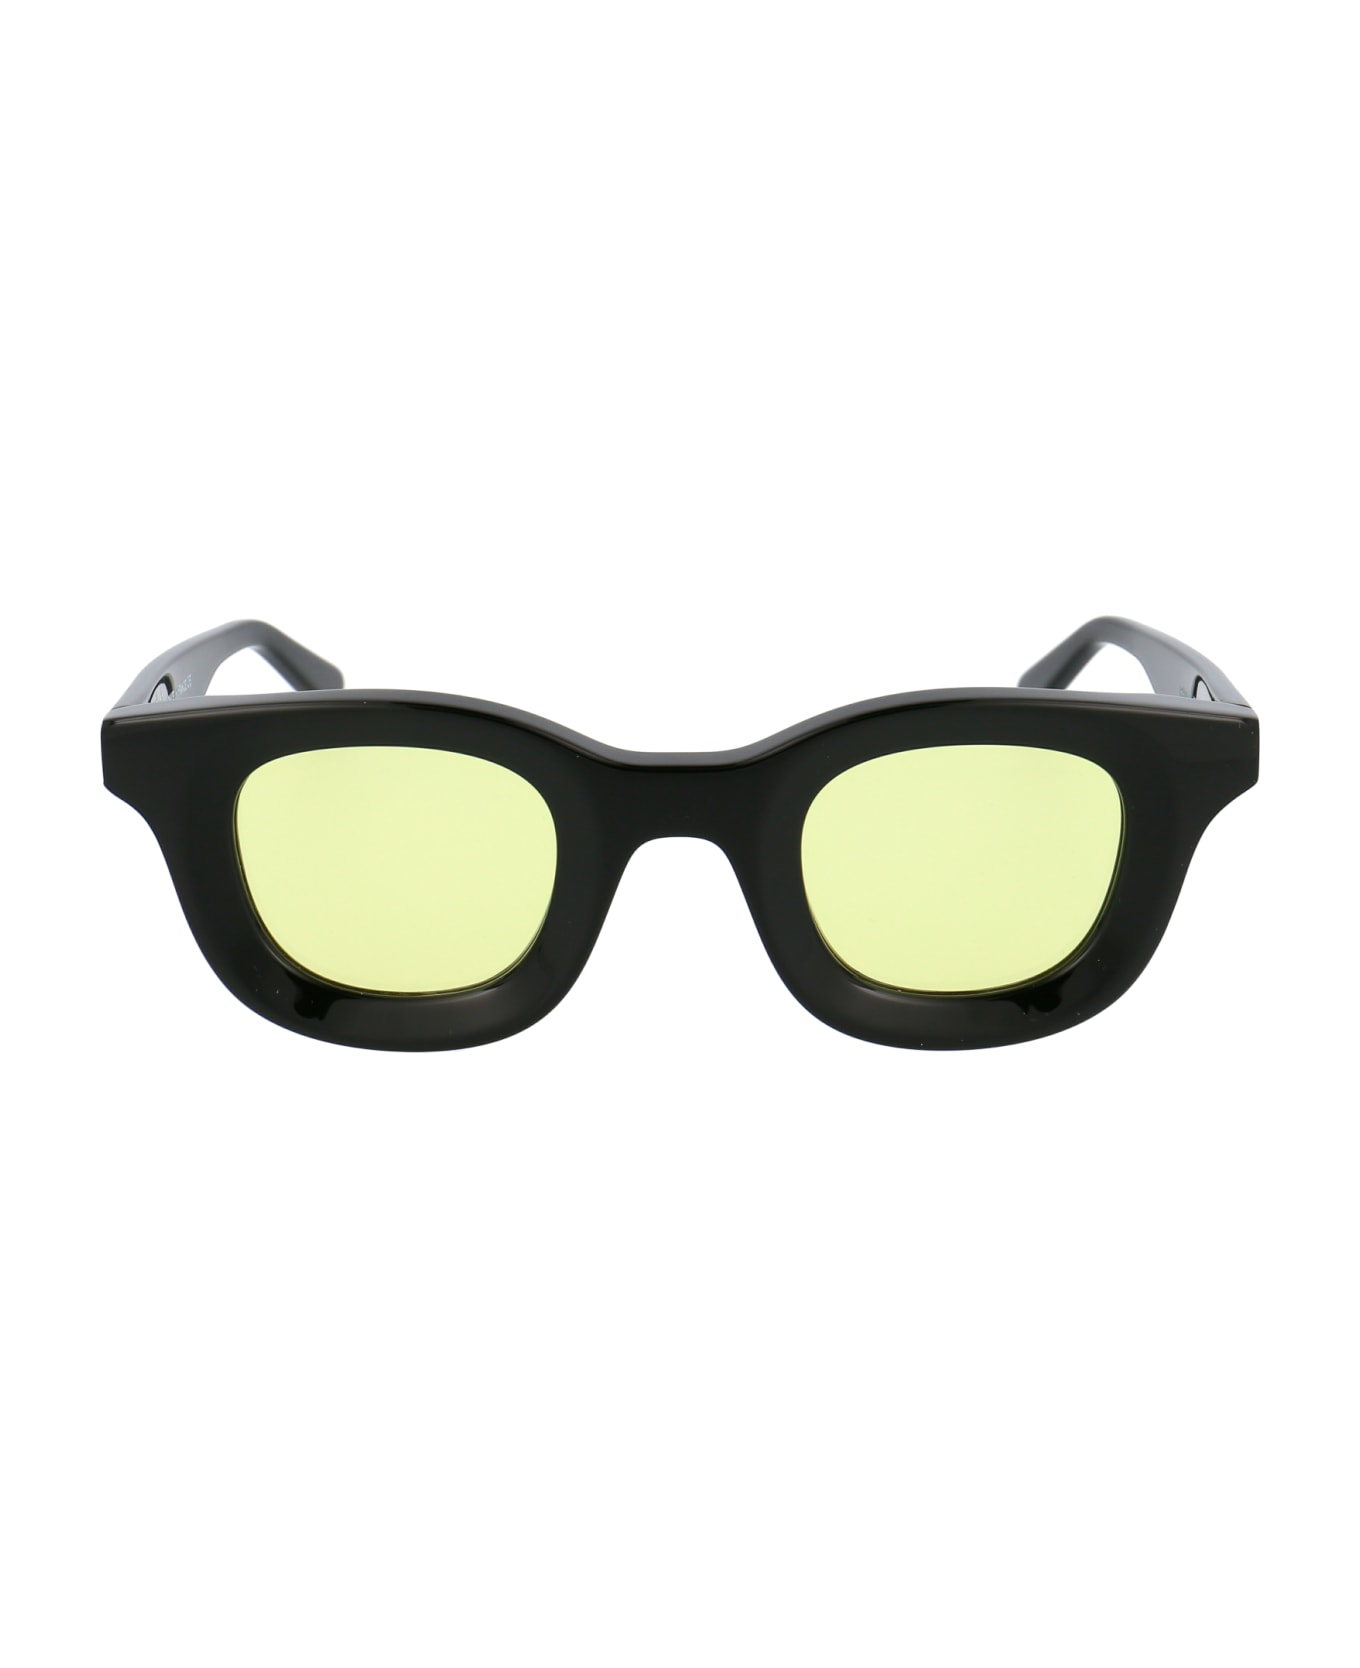 Thierry Lasry Rhude X Thierry Lasry Sunglasses - 101 BLACK/YELLOW